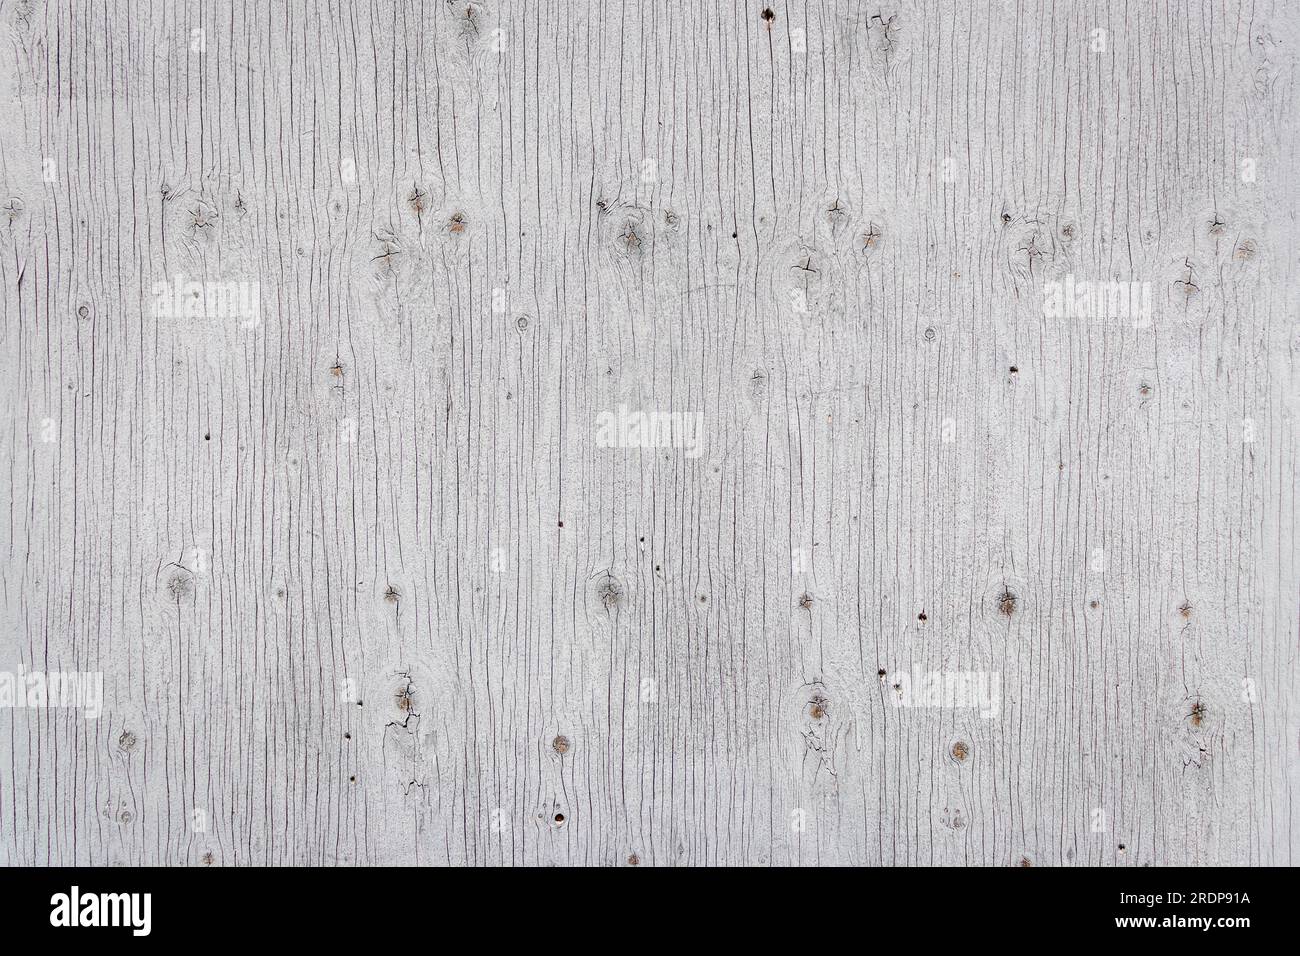 Rustic wooden plank wall with horizontal boards and visible nails - wood grain Stock Photo